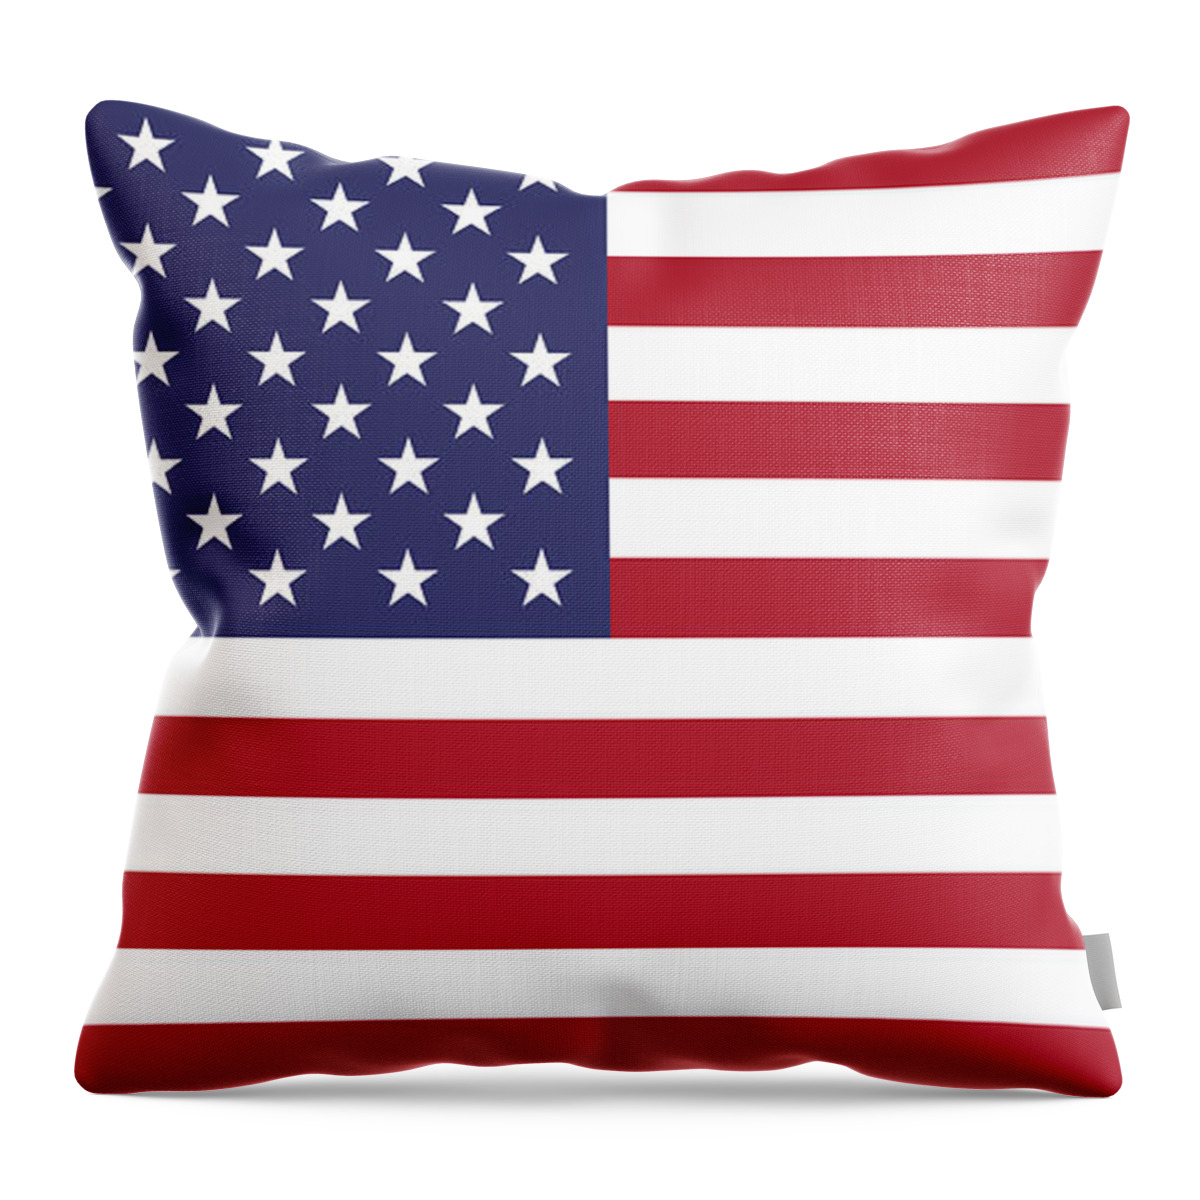 Face Mask Throw Pillow featuring the digital art American Flag by Roy Pedersen